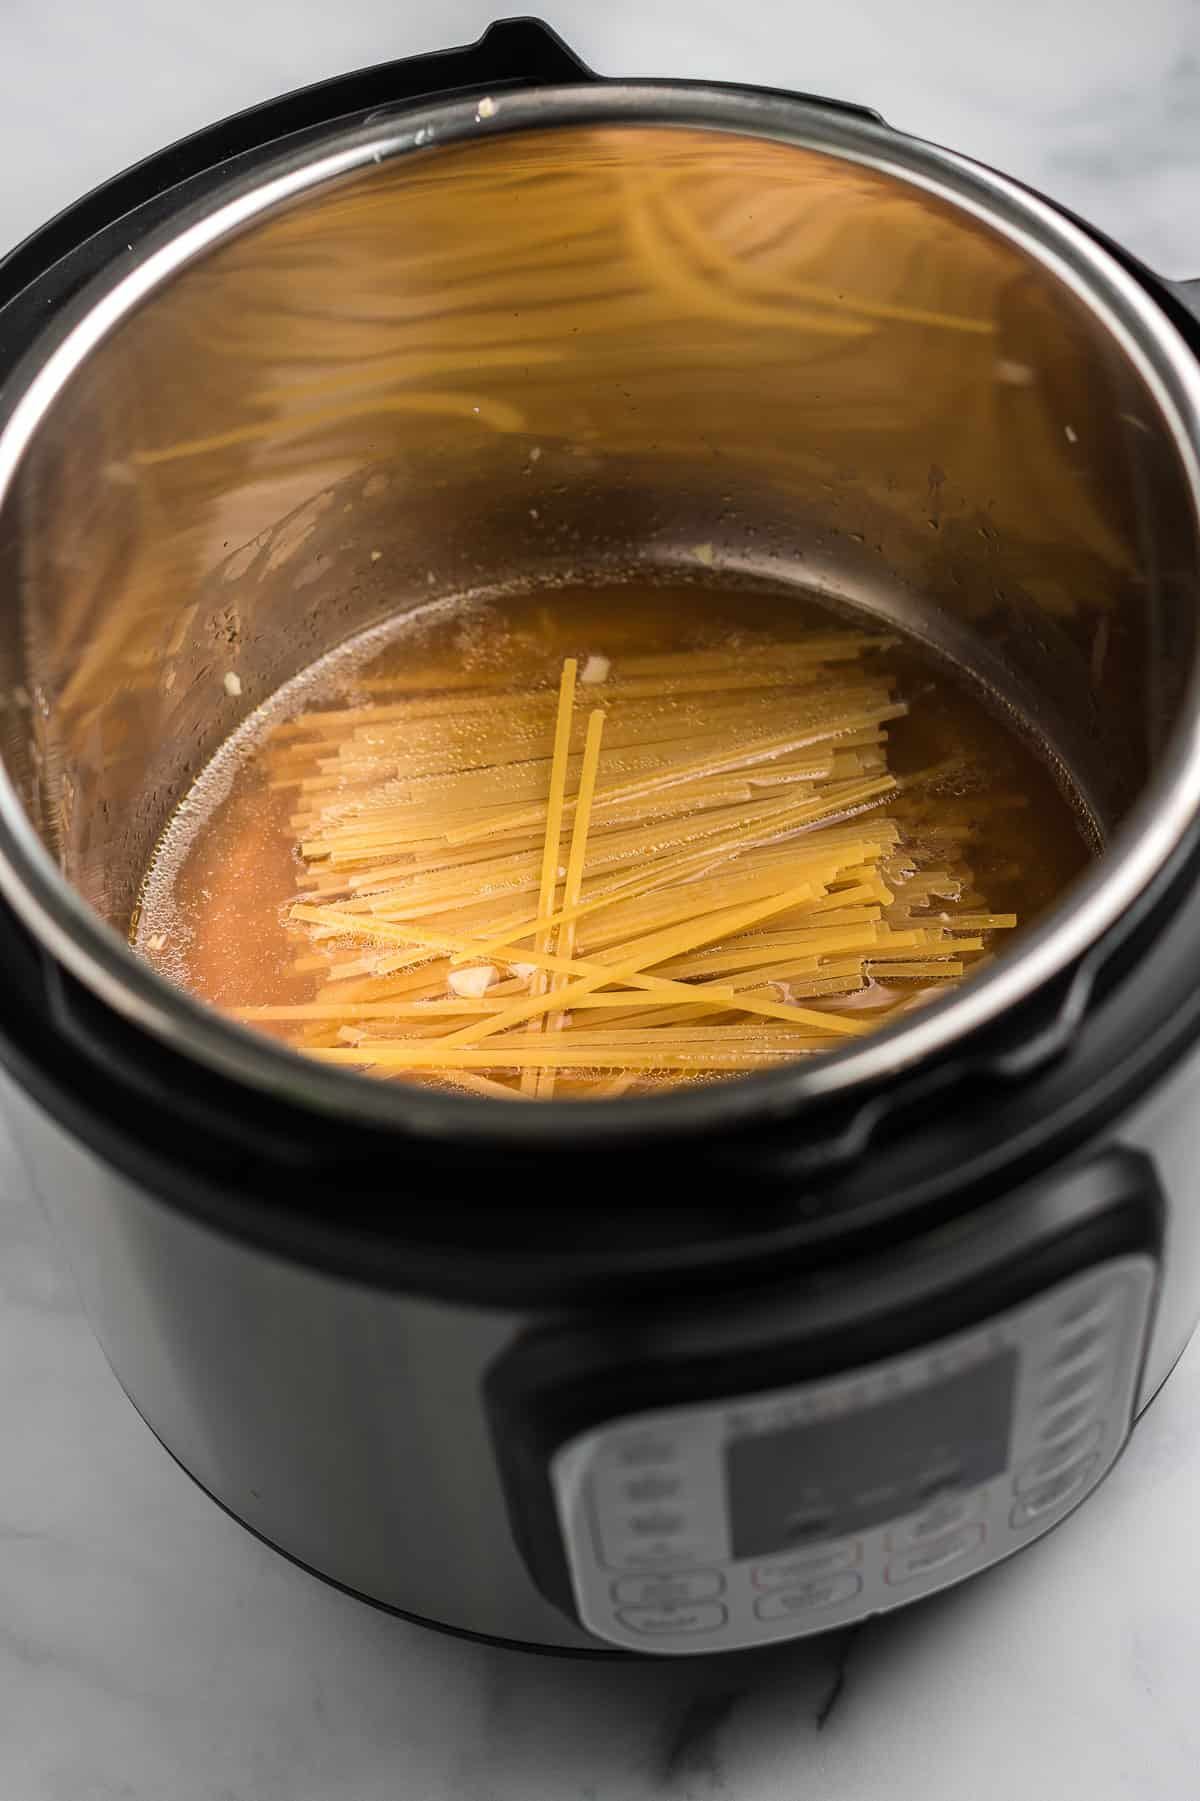 linguini noodles and vegetable broth in the instant pot